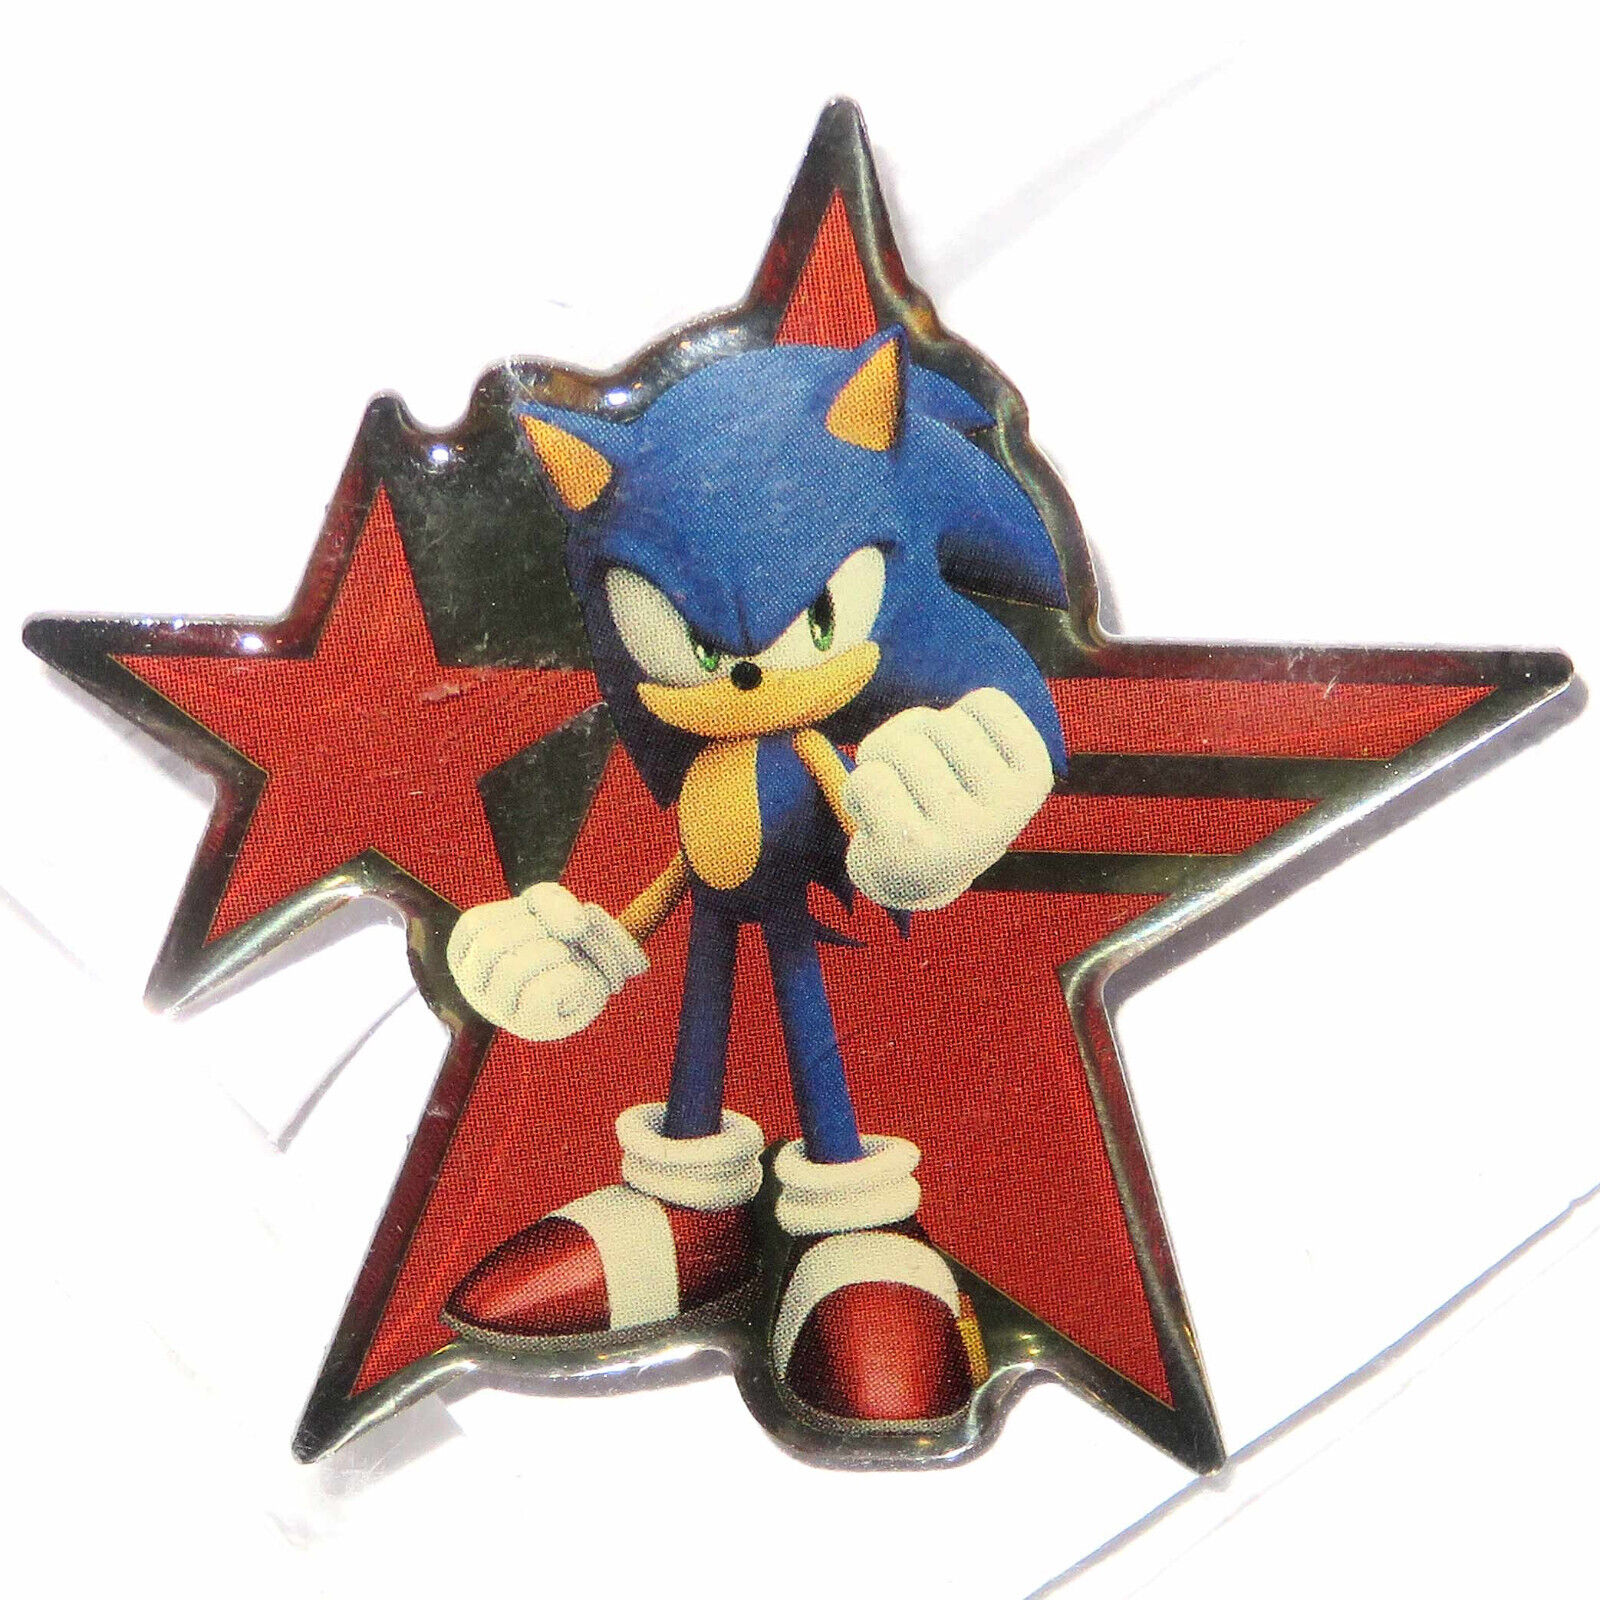 NEW SONIC FORCES PREORDER PIN SEGA SONIC THE HEDGEHOG JAPAN BADGE SEALED RARE